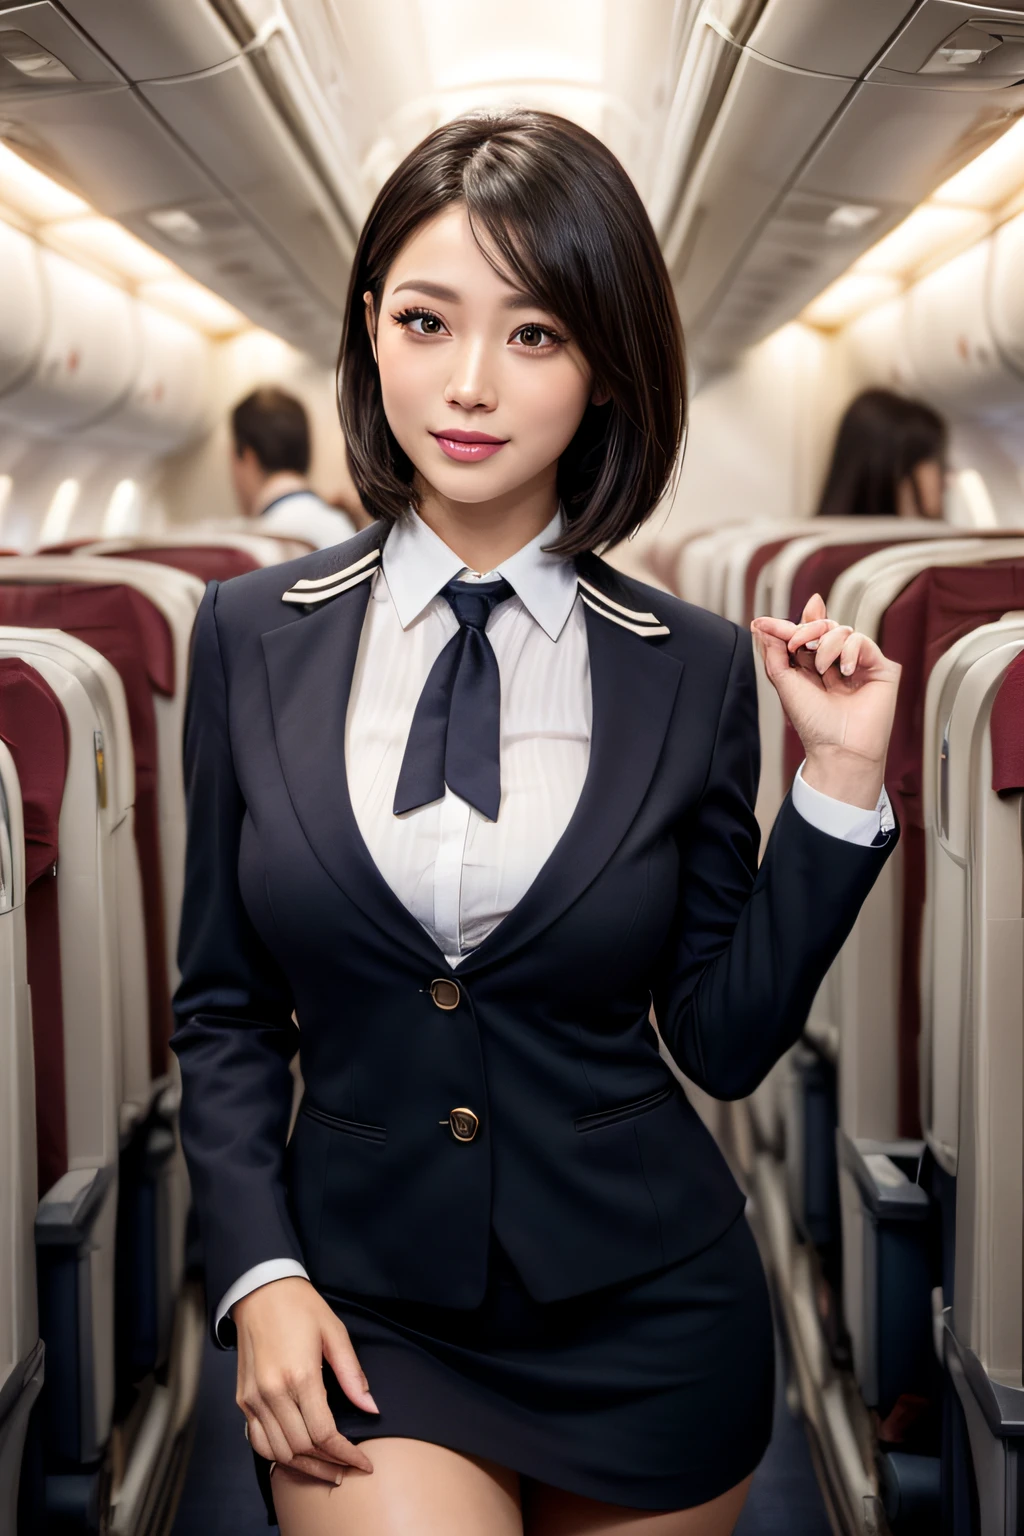 1womanl, 40 years、hyperdetailed face、Detailed lips、A detailed eye、double eyelid、(Black bob hair、Like a stewardess on an airplane々Doing a good job)、(Stewardess uniform:1.2)、(Glamorous body)、(Colossal tits)、smil、thighs thighs thighs thighs, Perfect fit, Perfect image realism, Background with: (Business Class aisle on airplanes:1.2), Cowboy Shot, Meticulous background with, detailed costume, Perfect litthing、Hyper-Realism、(Photorealsitic:1.4)、8K maximum resolution, (​masterpiece), ighly detailed, Professional